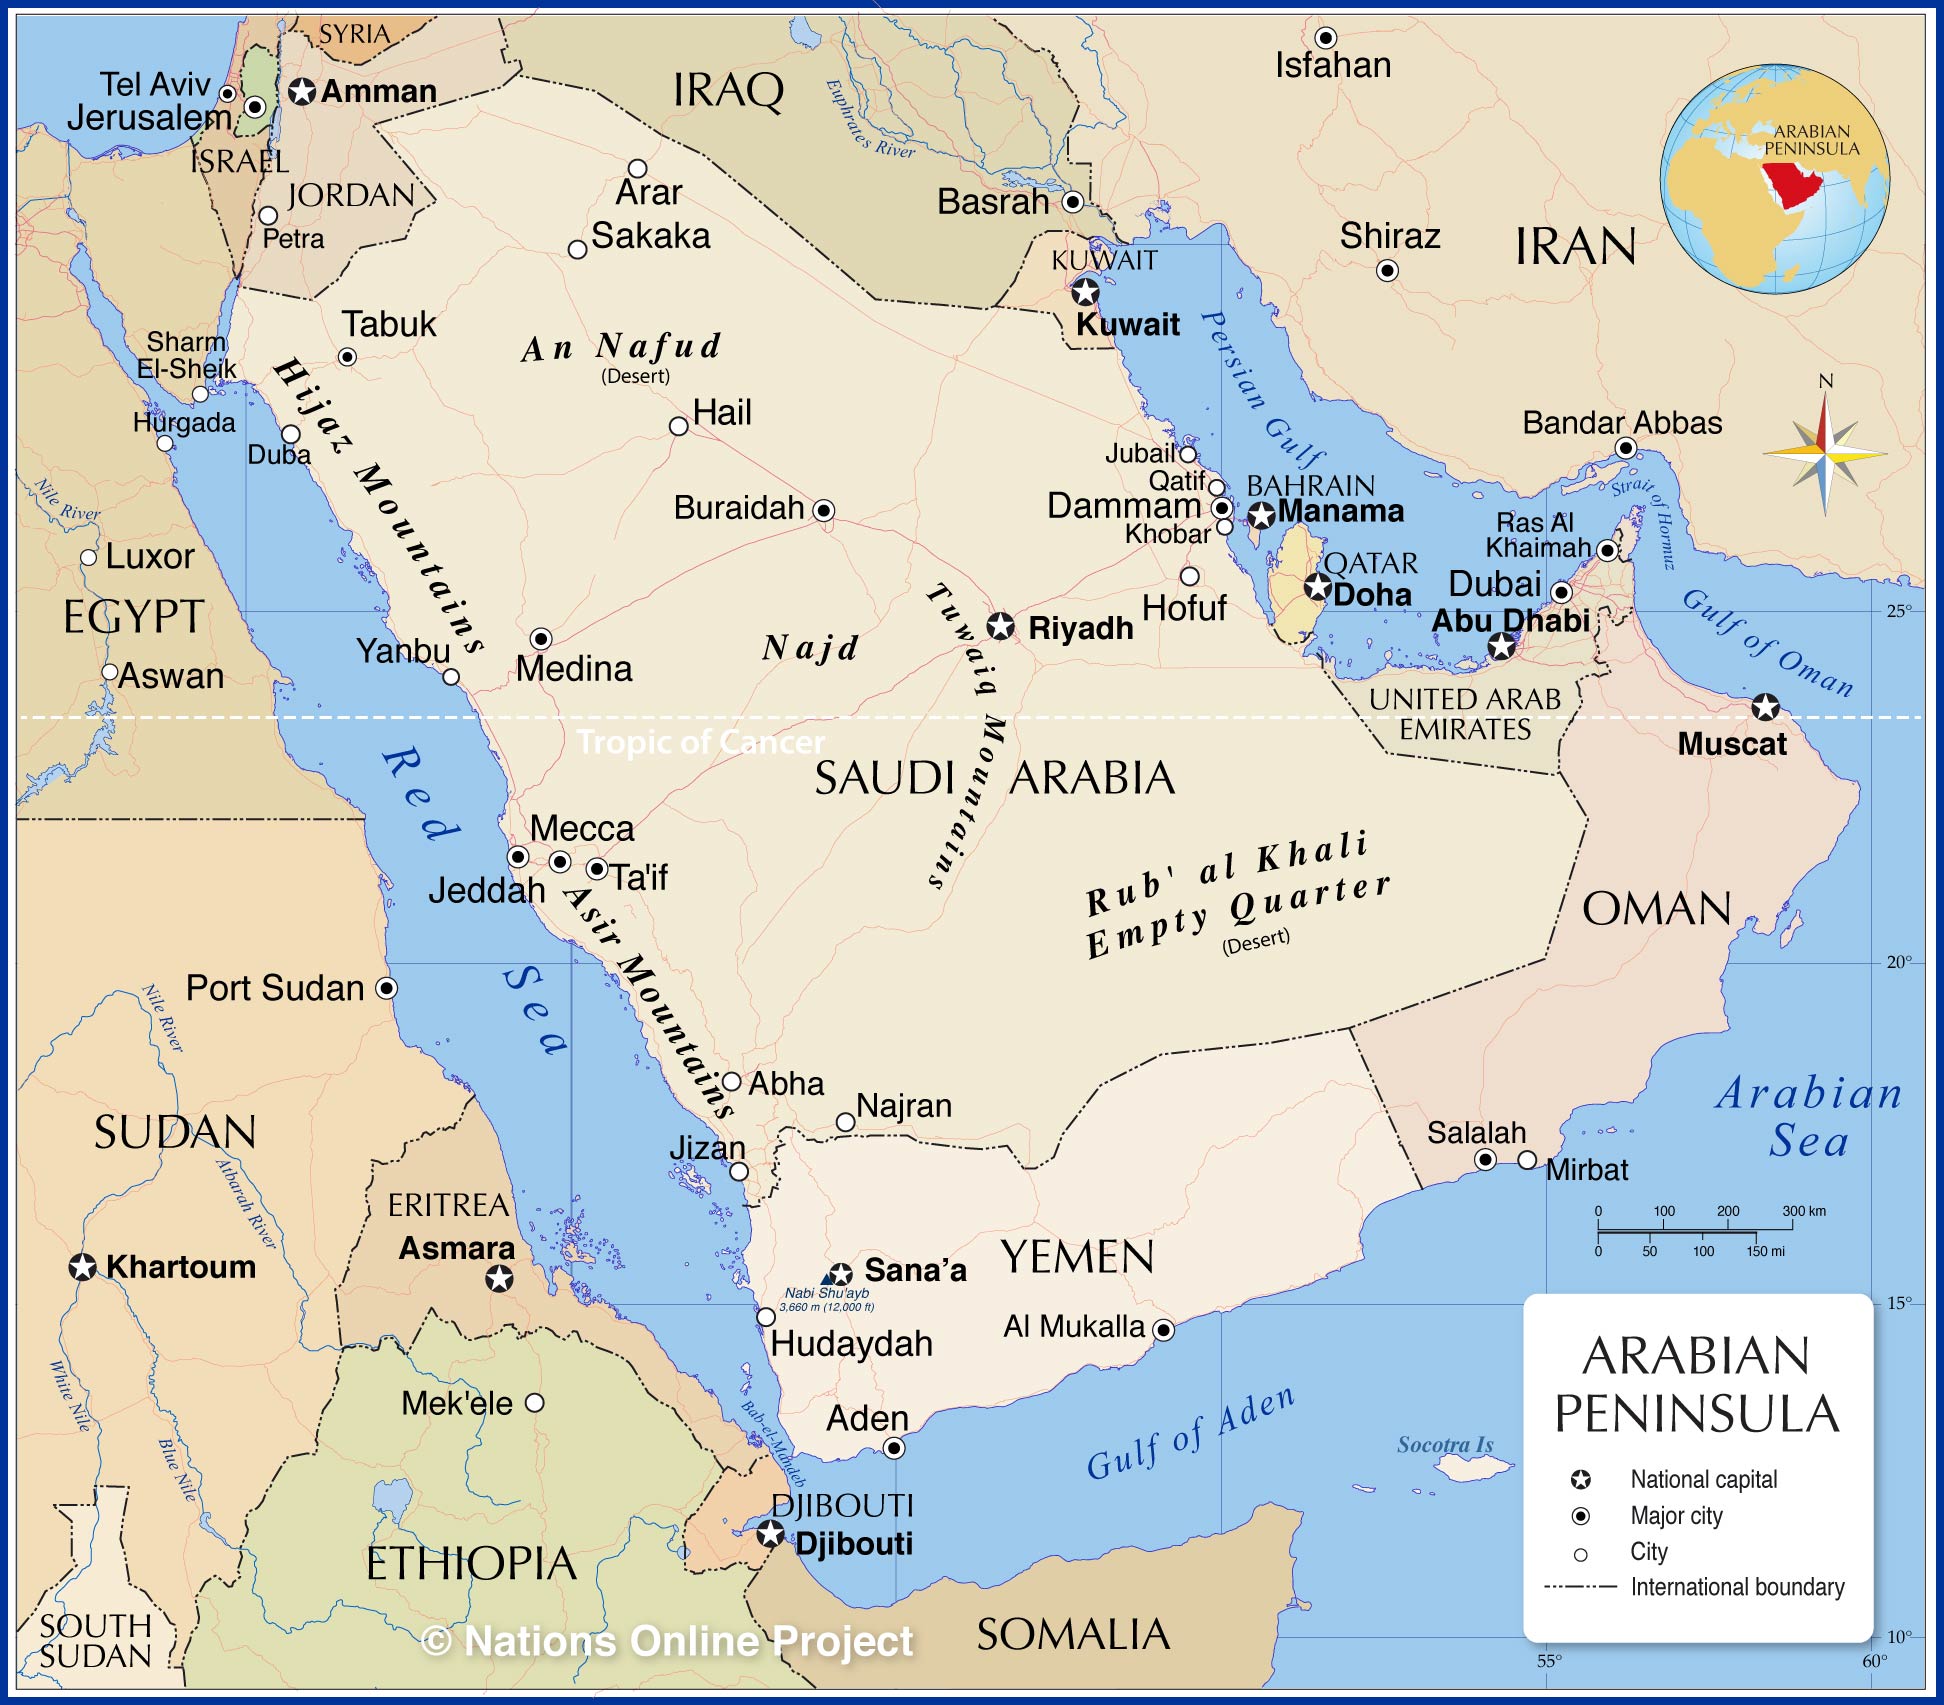 Political Map of the Arabian Peninsula - Nations Online Project